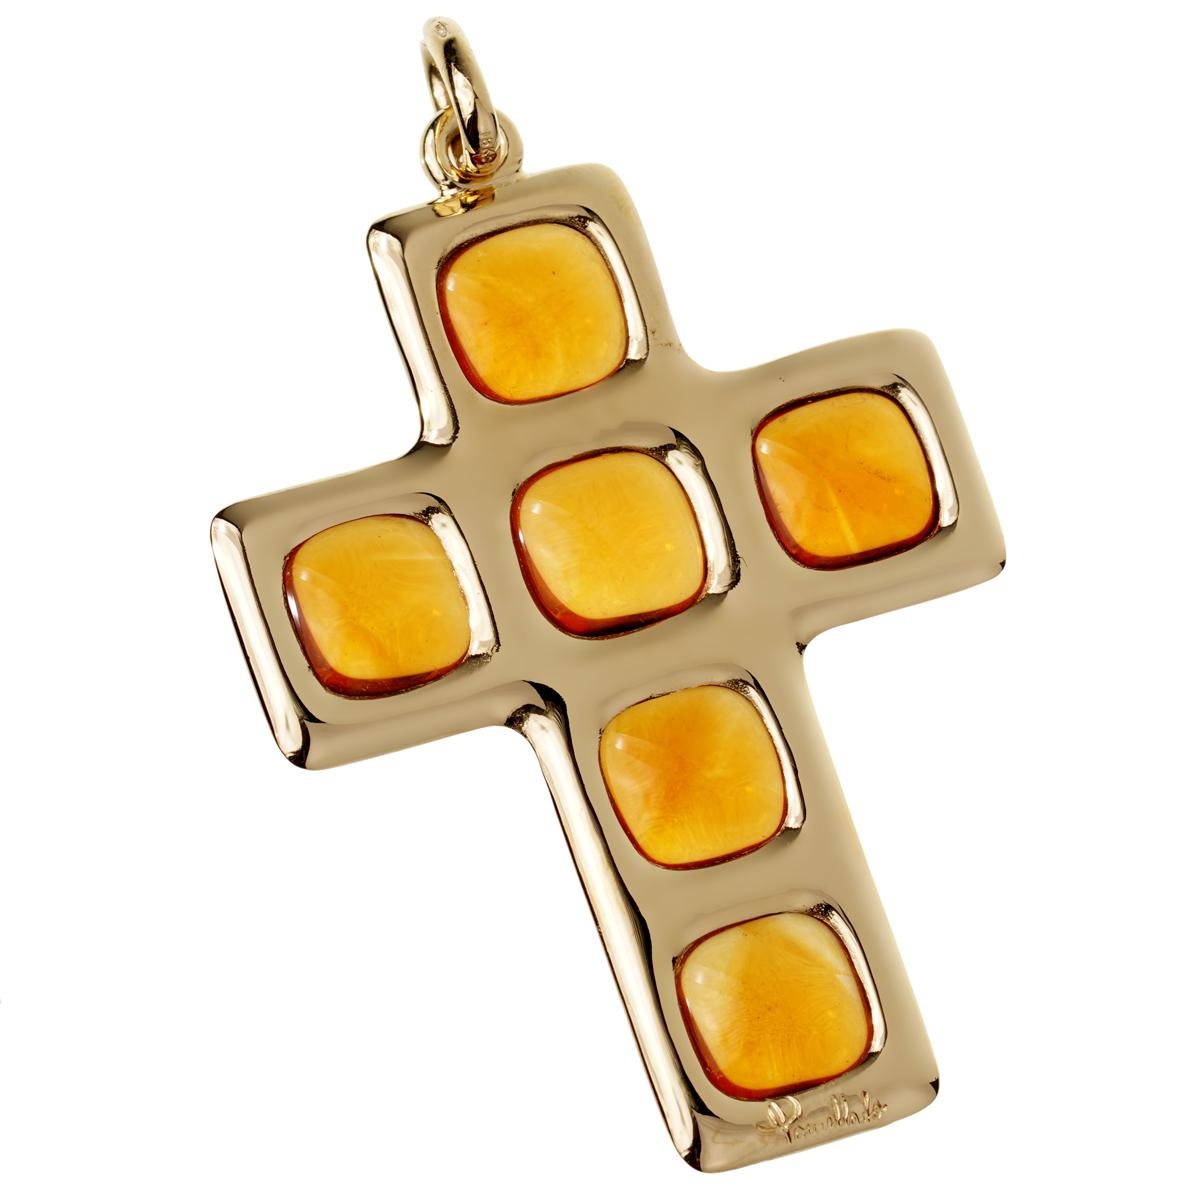 A fabulous Pomellato cross pendant showcasing 5 cabochon cut citrine stones weighing 27ct in 18k yellow gold. The pendant measures 2.51